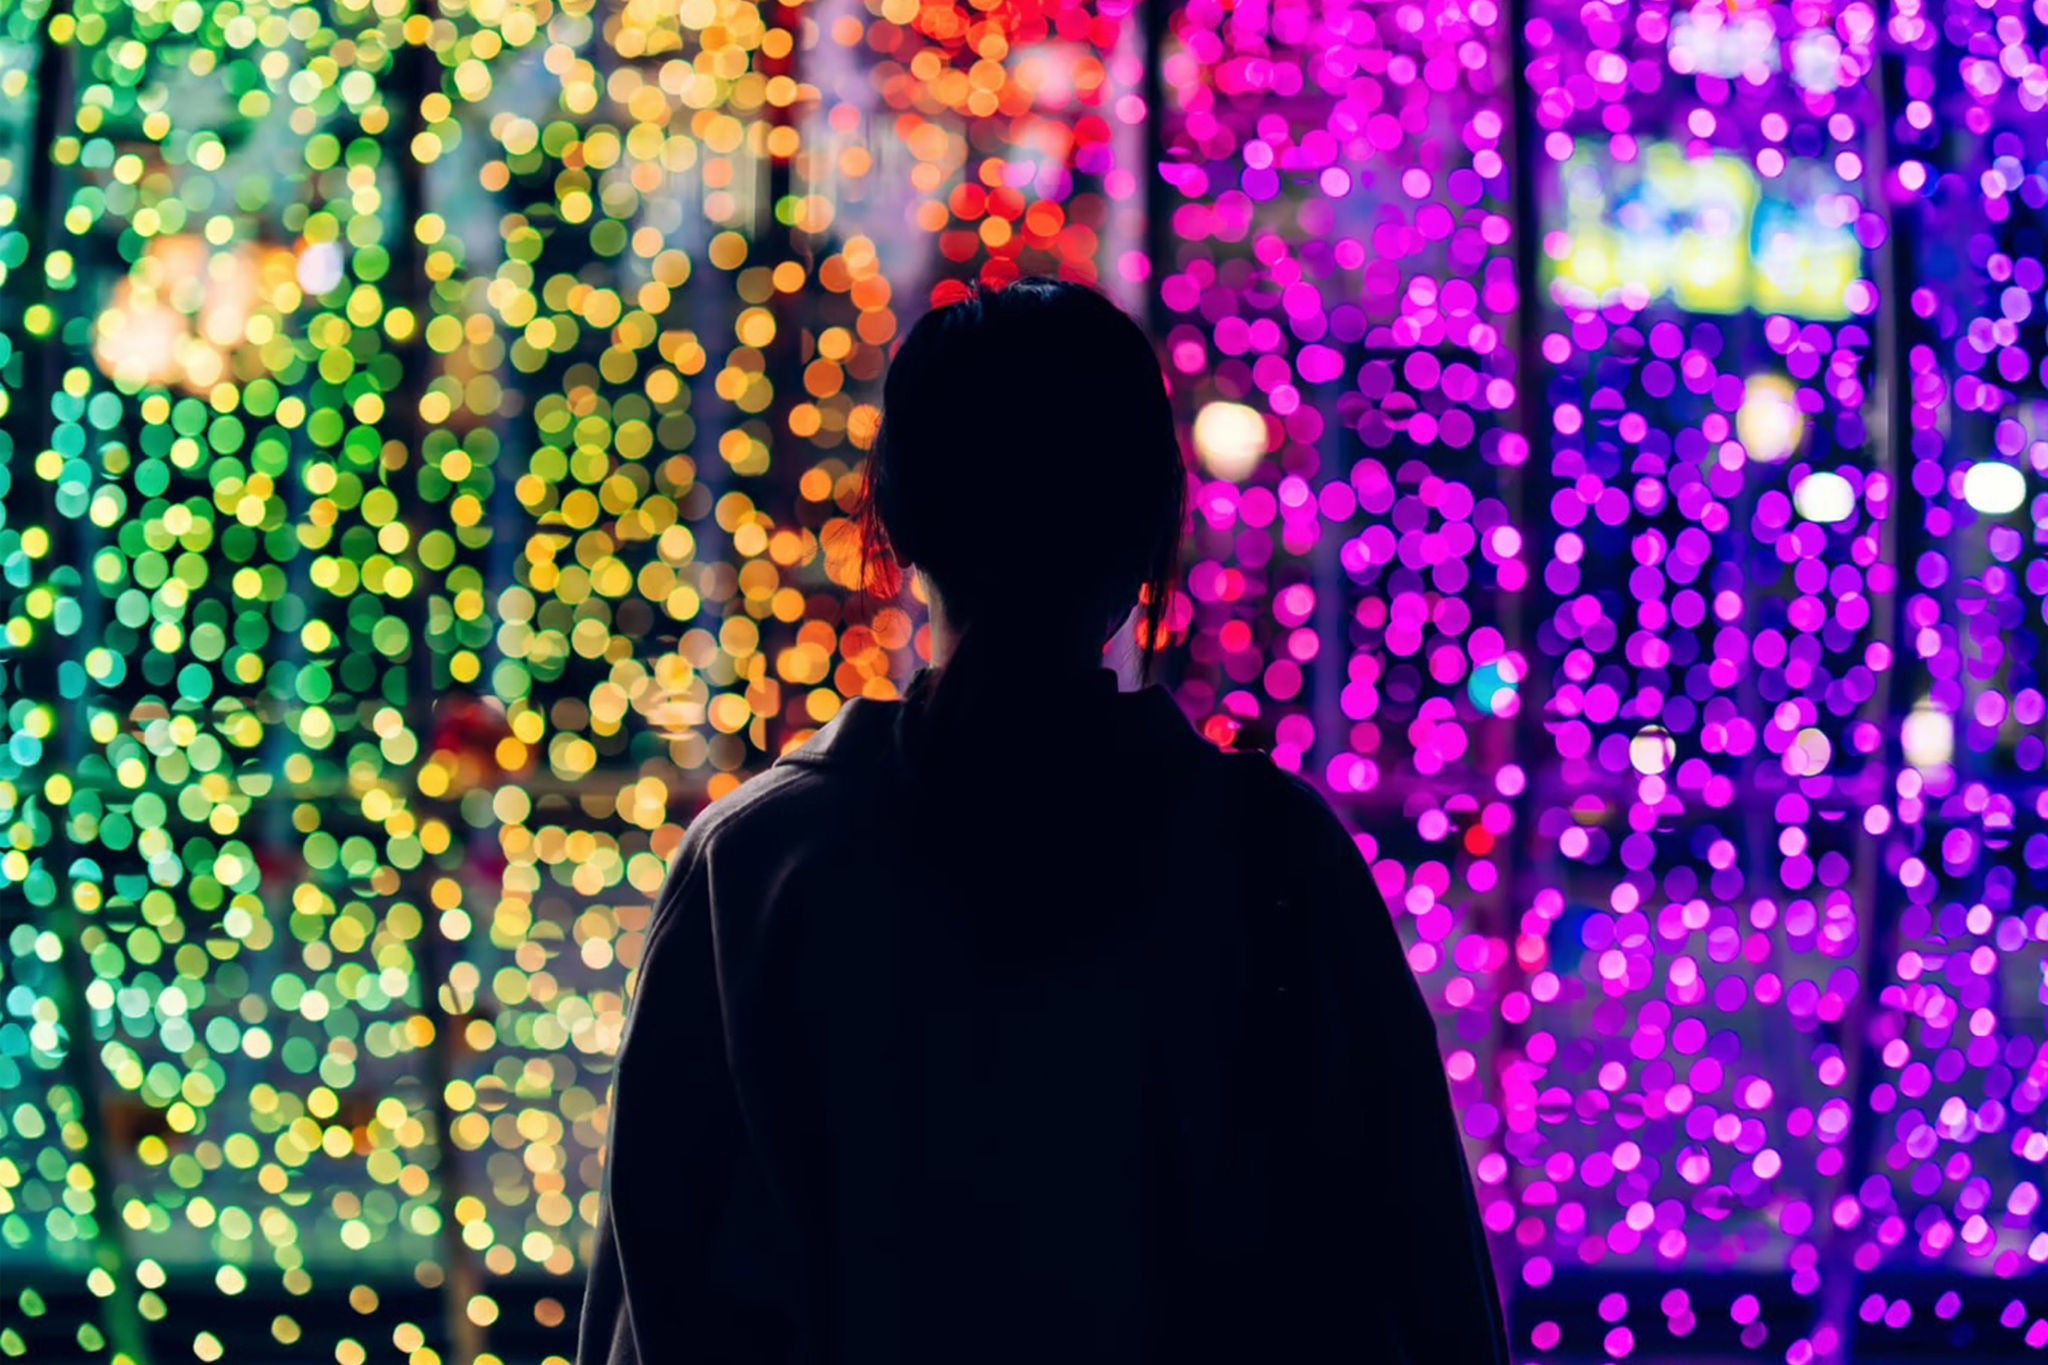 Silhouette of young woman standing against illuminated and colourful bokeh lights background in the city at night - stock photo